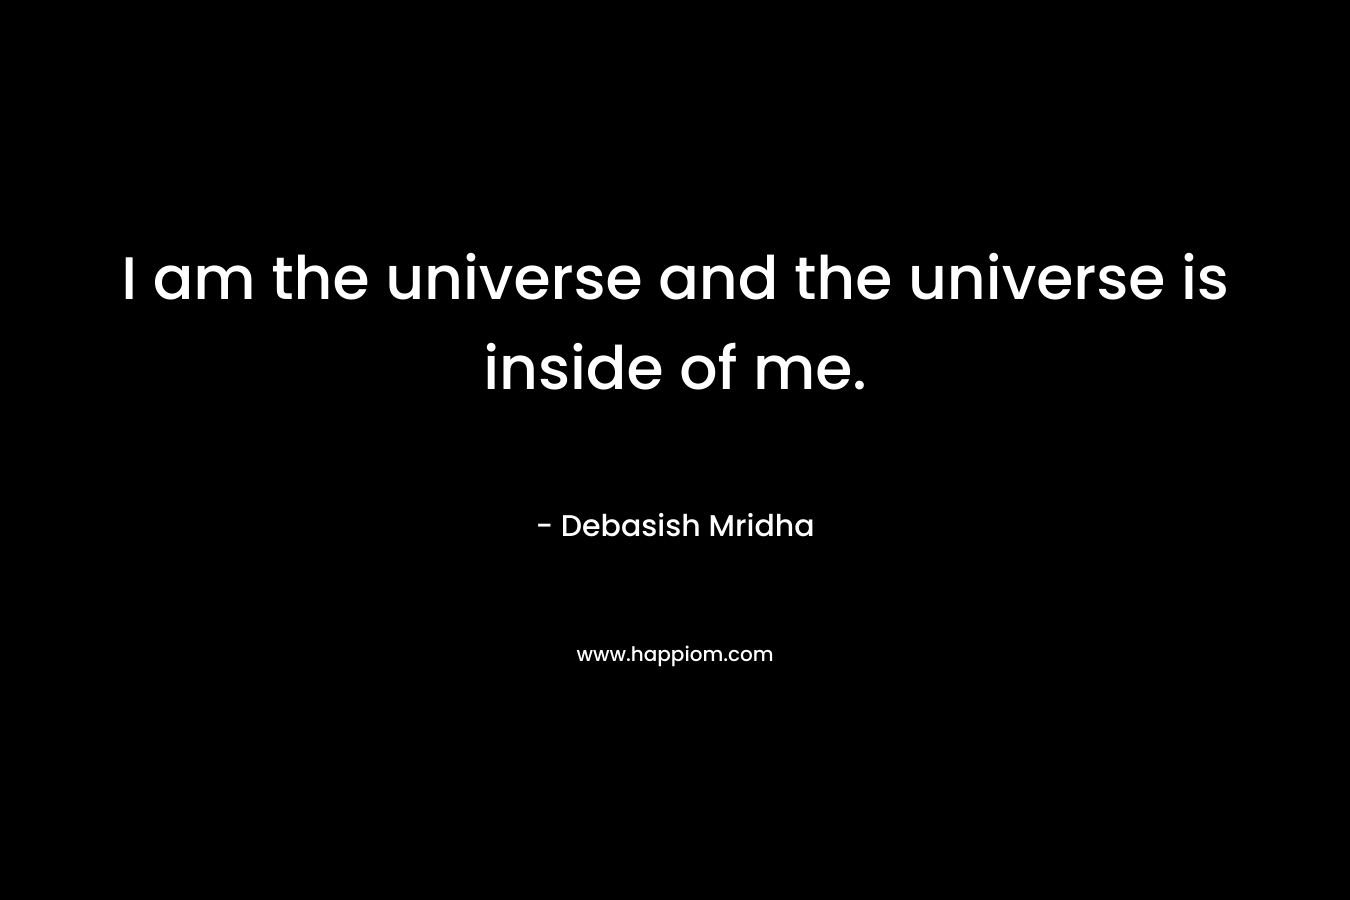 I am the universe and the universe is inside of me.